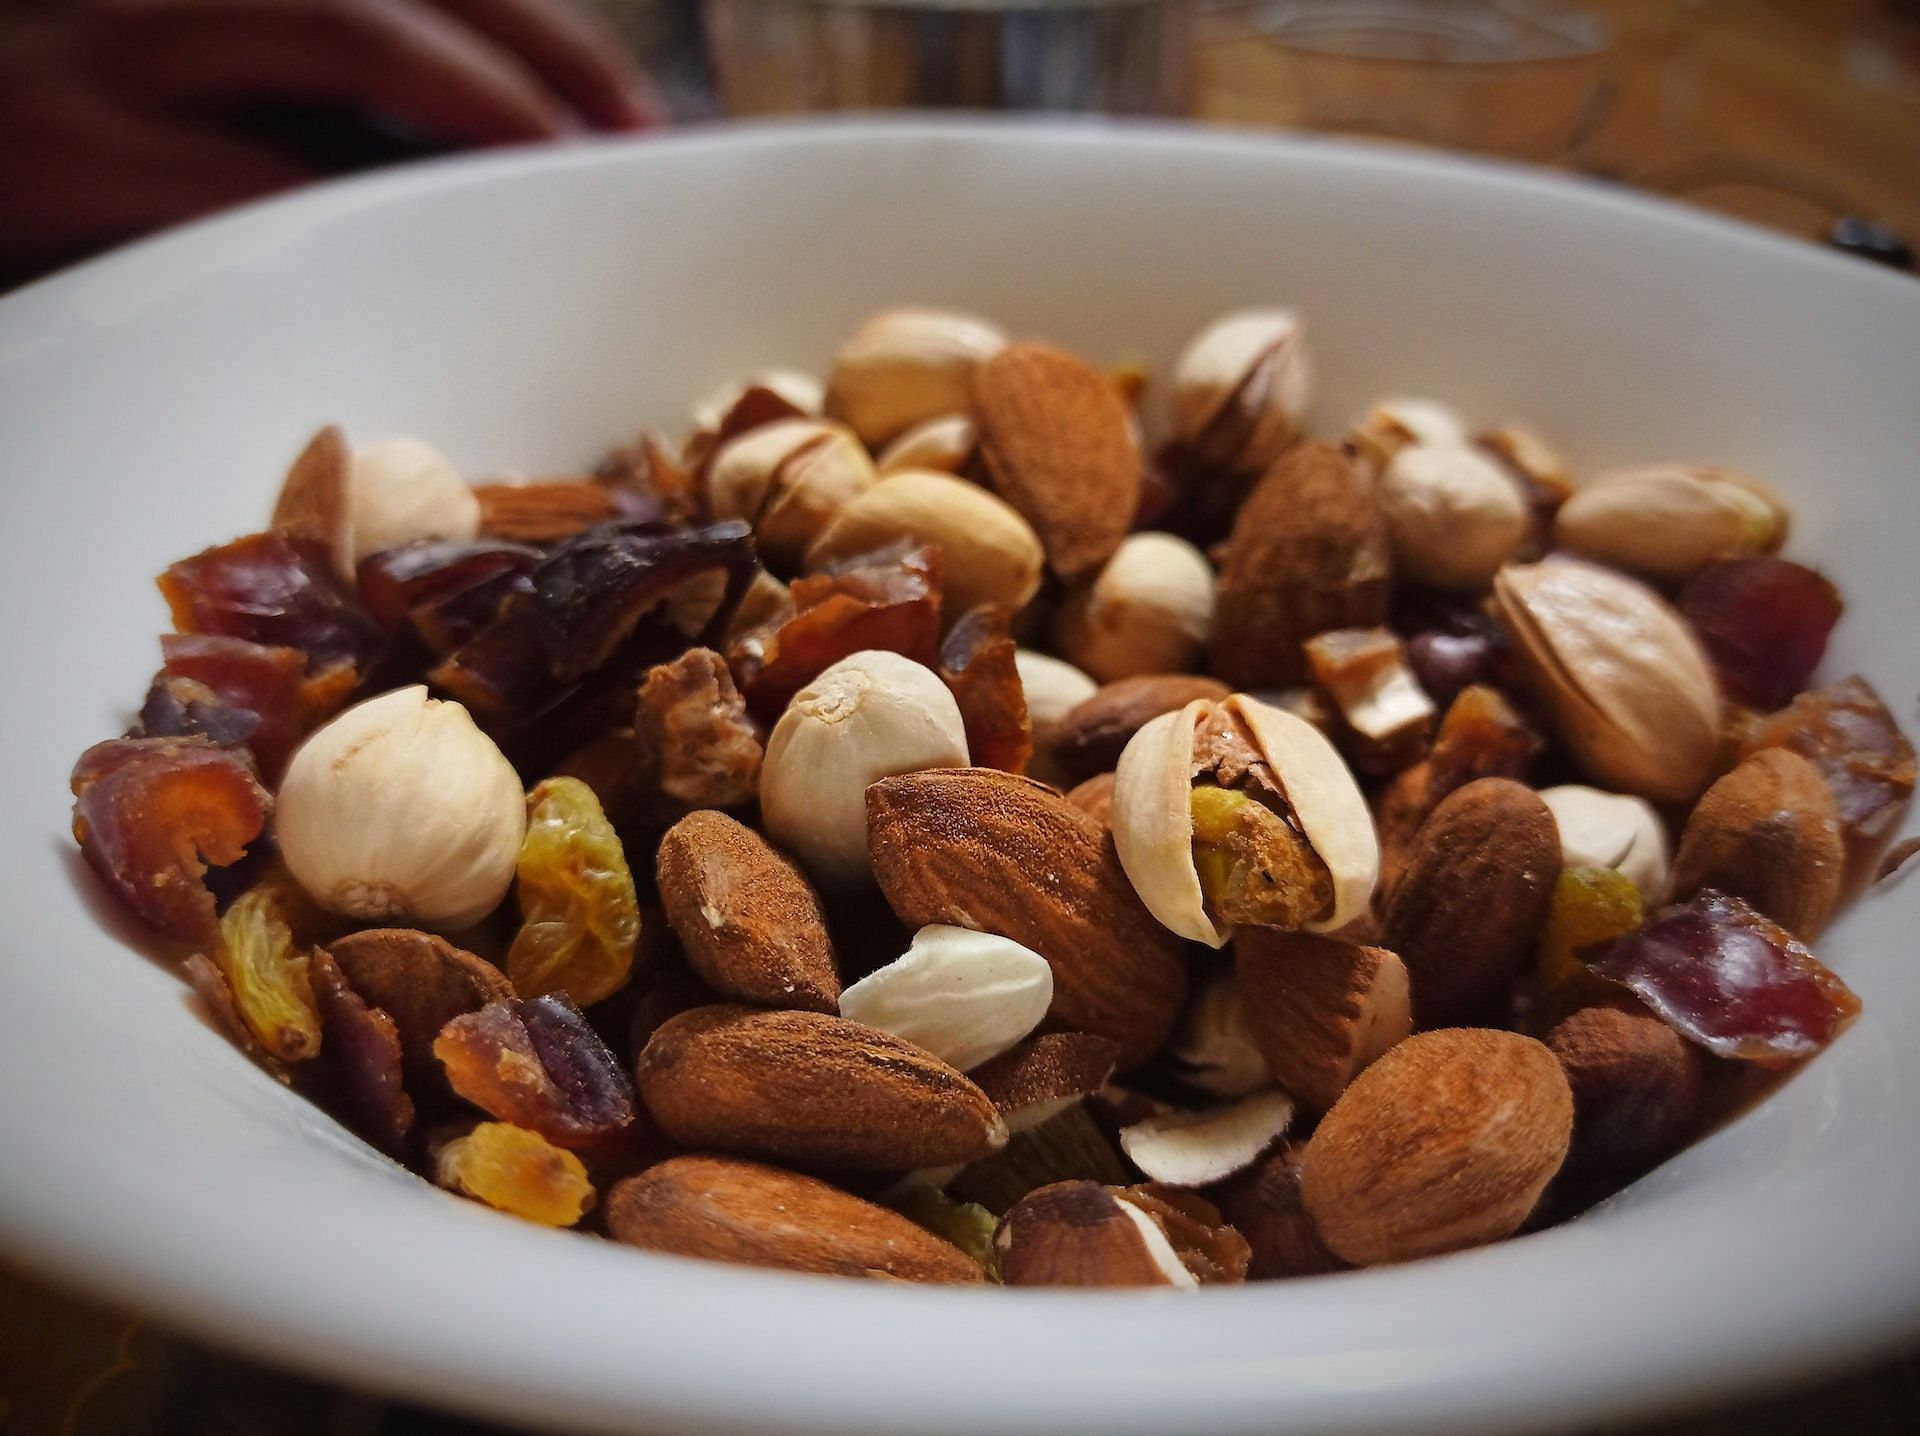 Trail mix combines nuts, dried fruits and seeds. (Photo via Pexels/Farheen)